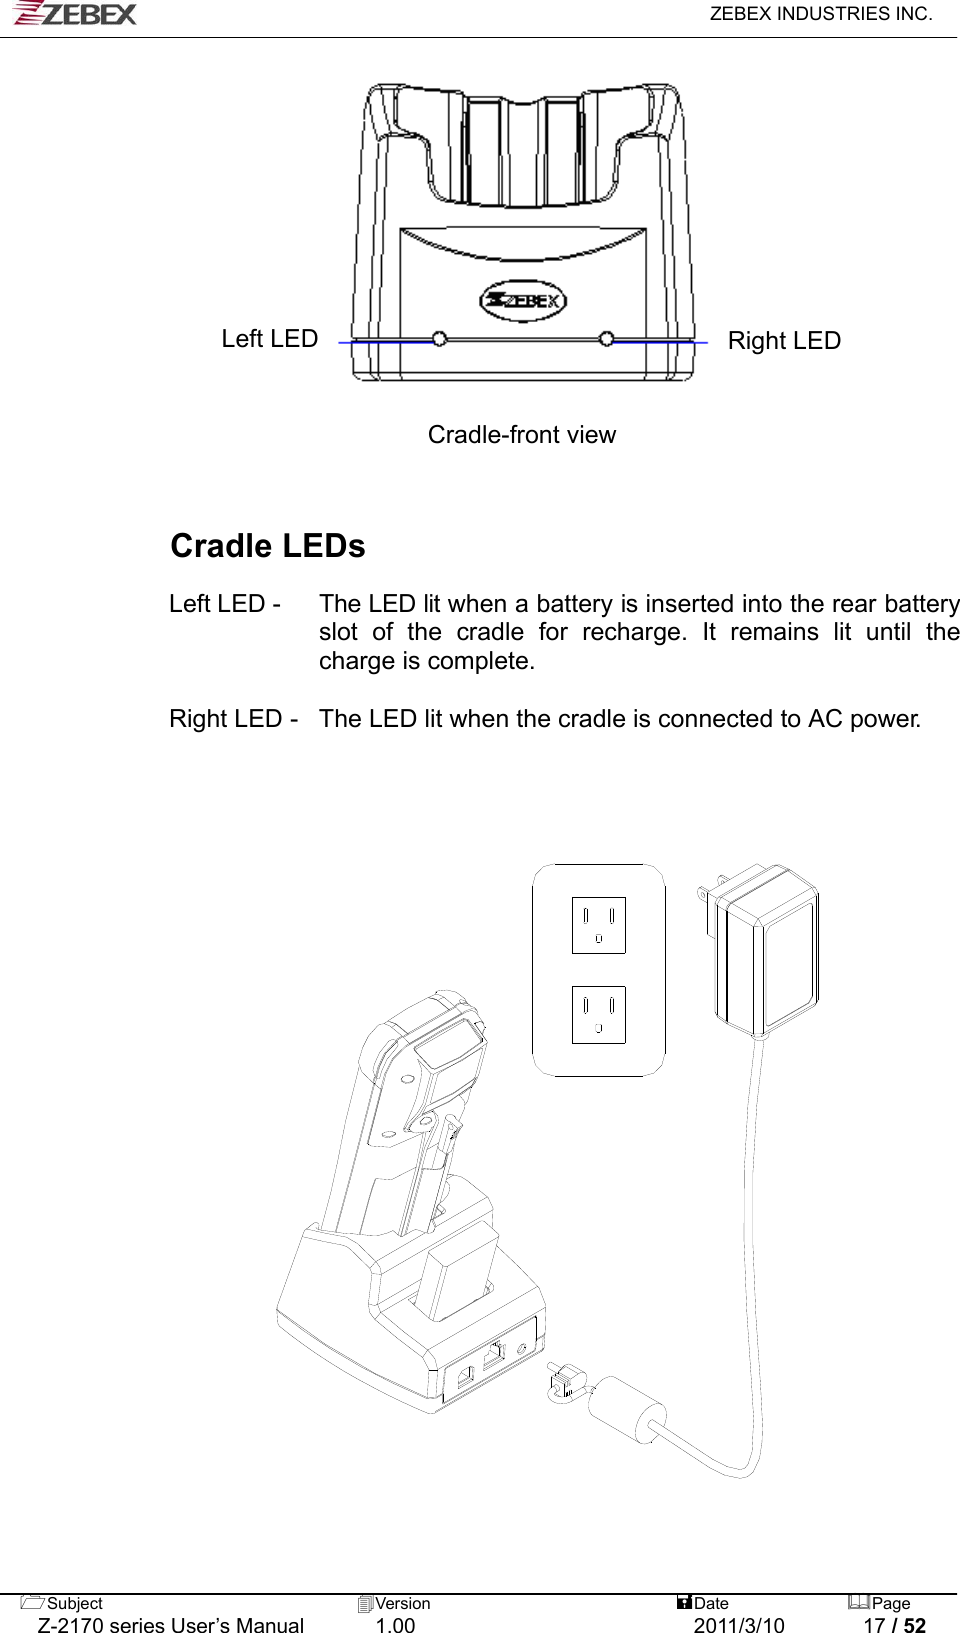   ZEBEX INDUSTRIES INC.  Subject  Version   DatePage   Z-2170 series User’s Manual  1.00  2011/3/10  17 / 52             Left LED  Right LED  Cradle-front view    Cradle LEDs  Left LED -    The LED lit when a battery is inserted into the rear battery slot of the cradle for recharge. It remains lit until the charge is complete.  Right LED -   The LED lit when the cradle is connected to AC power.                            